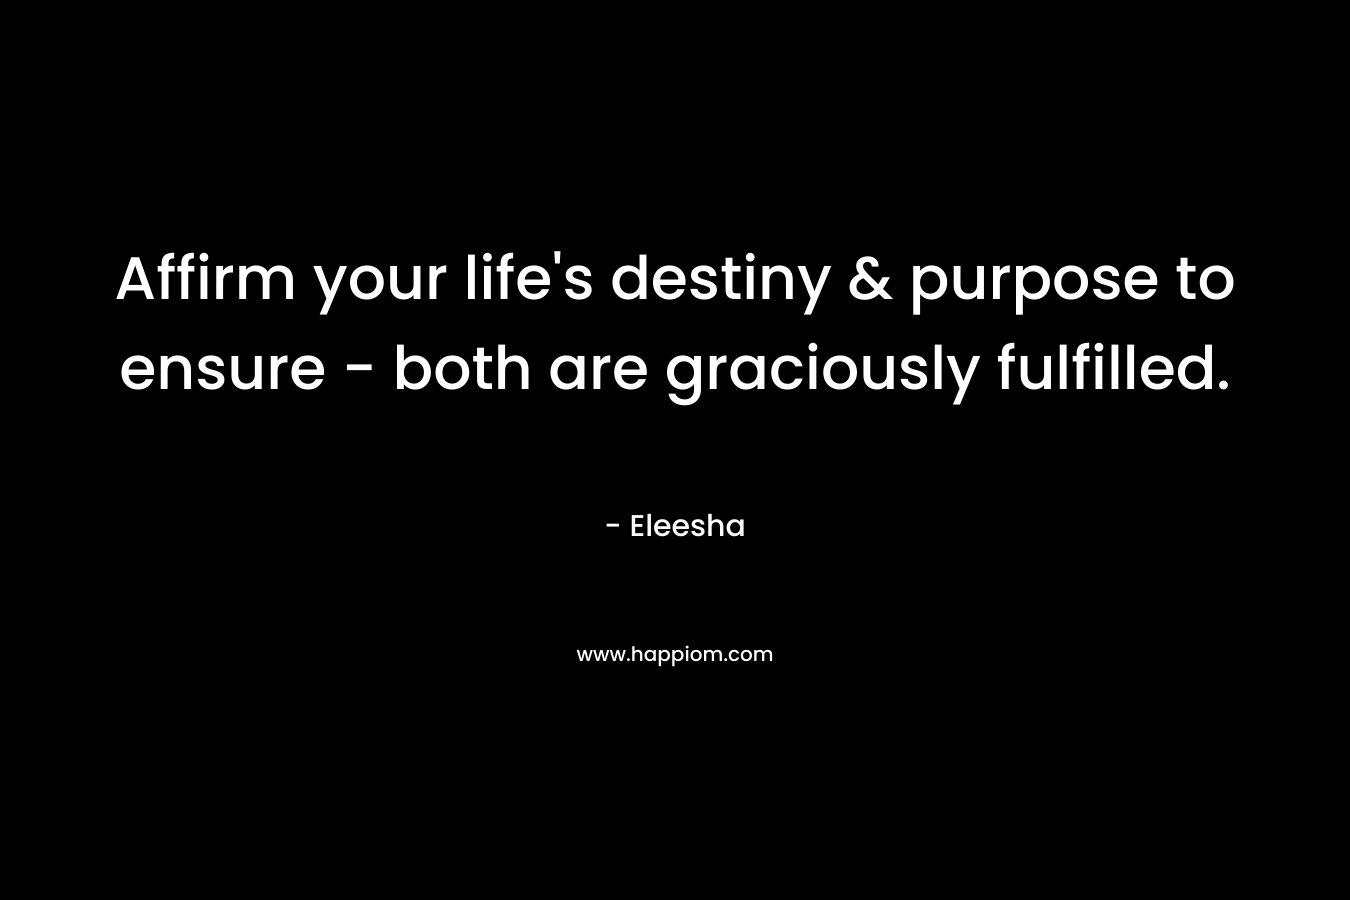 Affirm your life's destiny & purpose to ensure - both are graciously fulfilled.